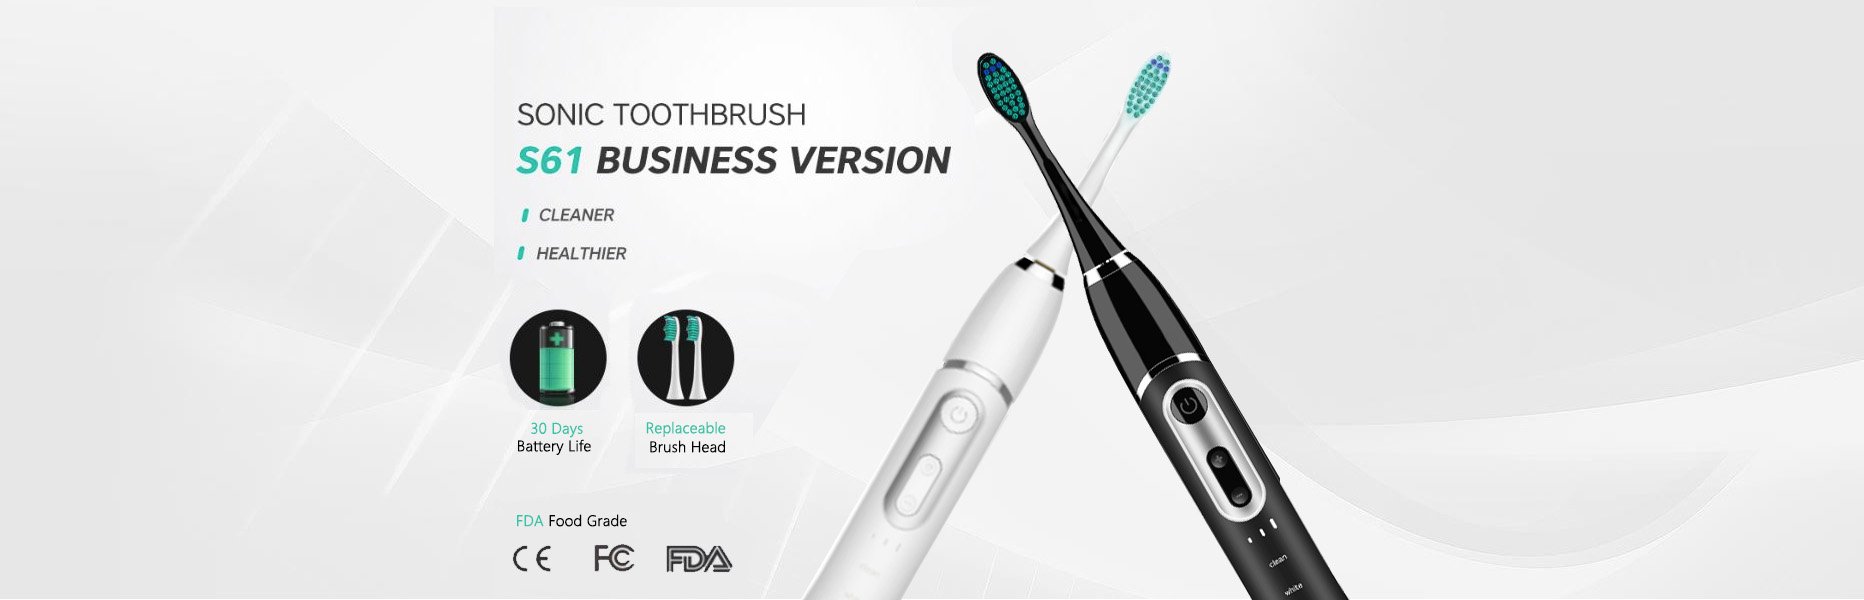 Rechargeable FCC FDA sonic toothbrush dental care electric toothbrush
